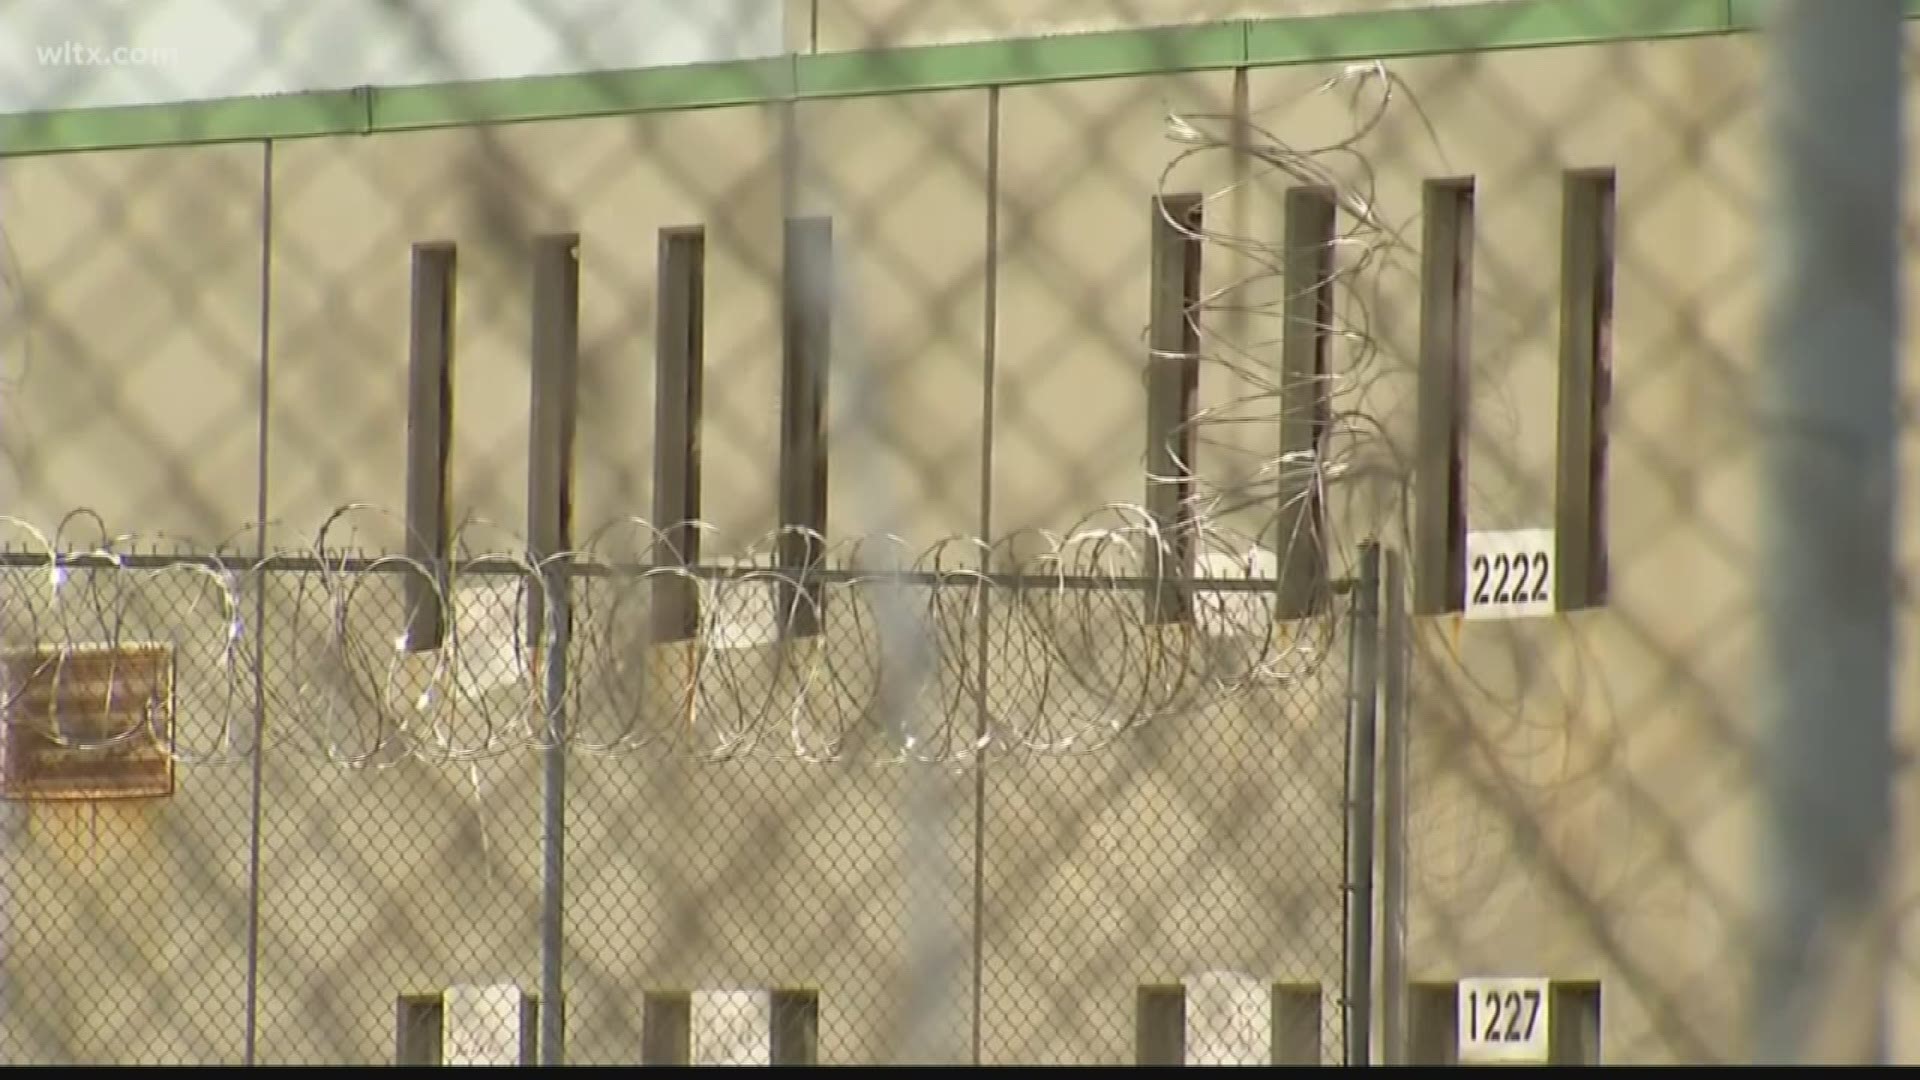 The SC Department of Corrections announced today 17 coronavirus cases among prison staff.